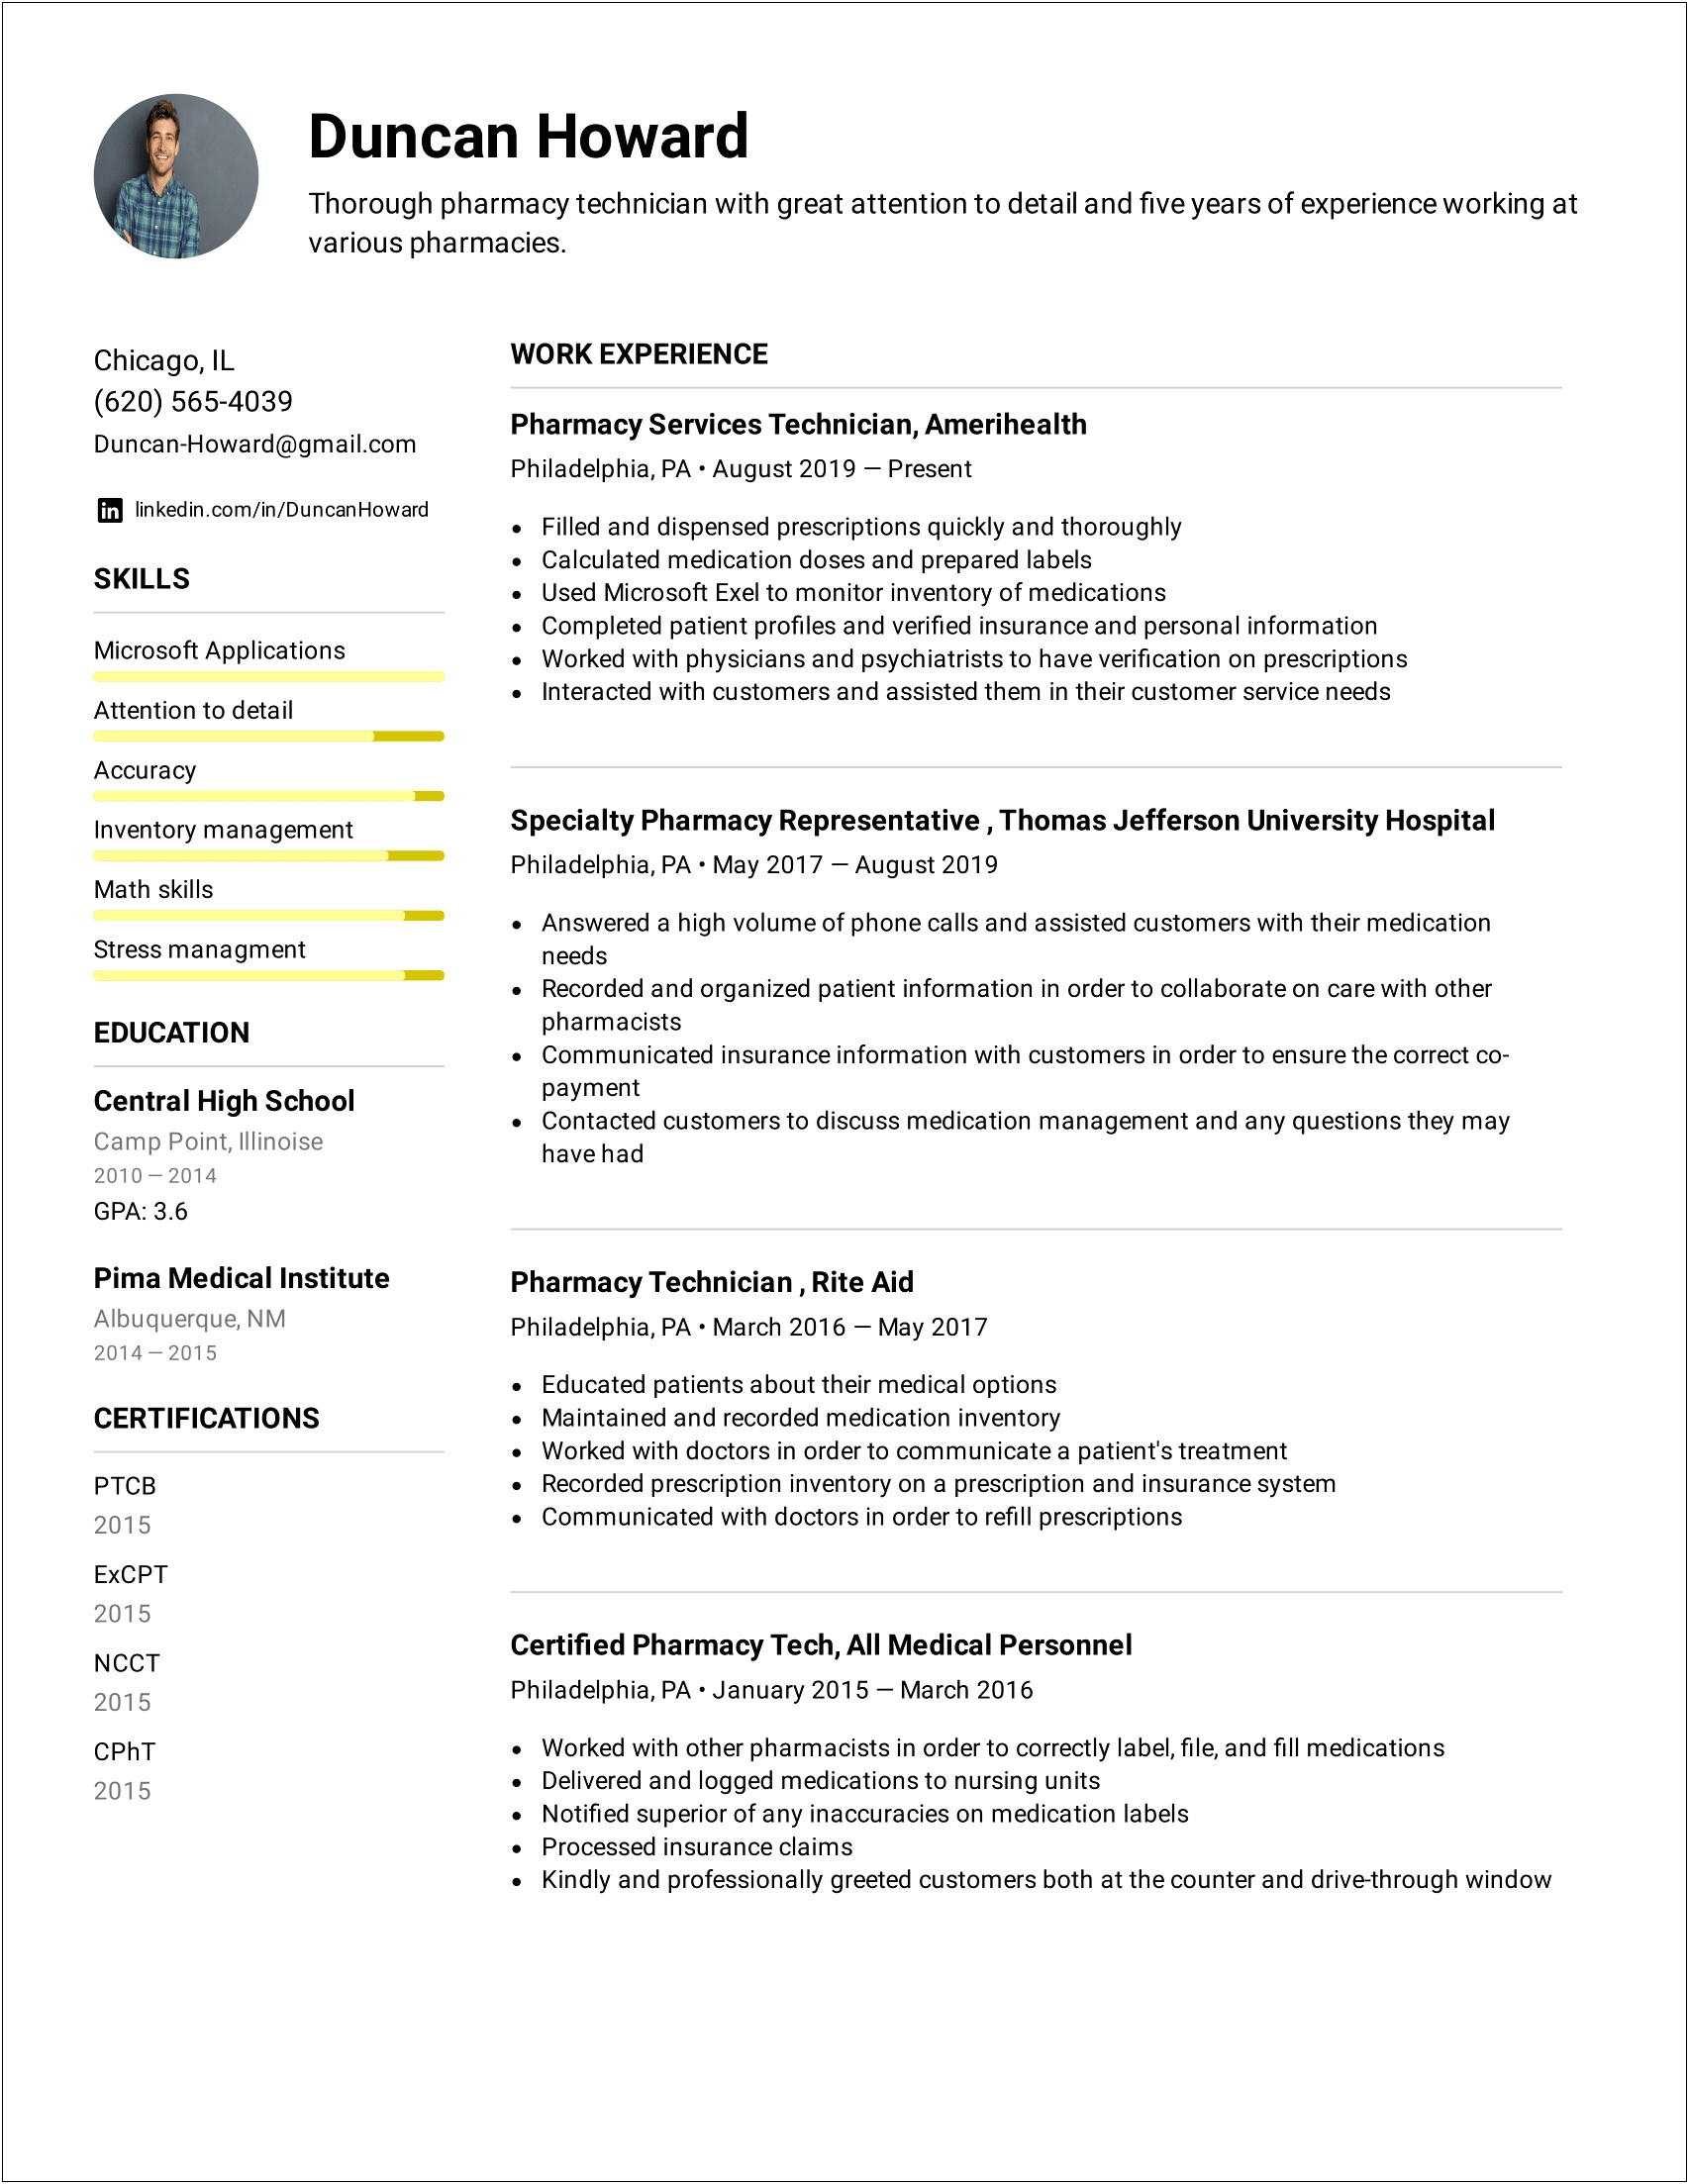 Free Code Camp Resume Examples